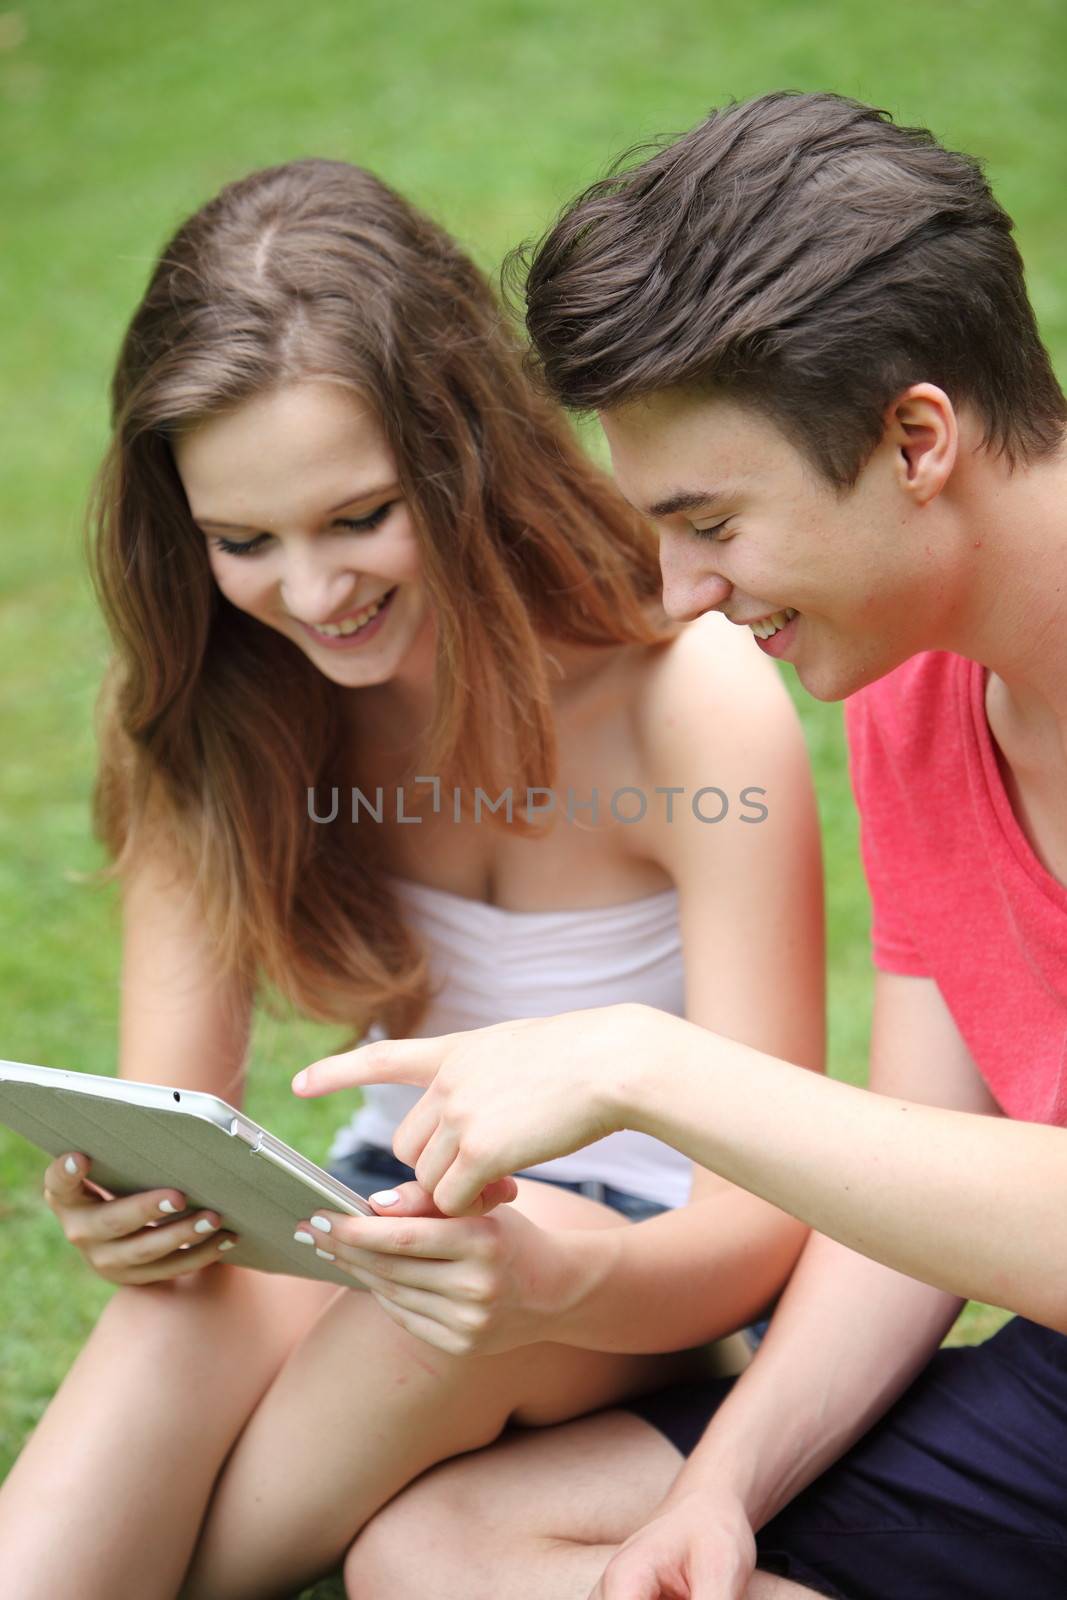 Teenage boy and girl using a tablet-pc by Farina6000